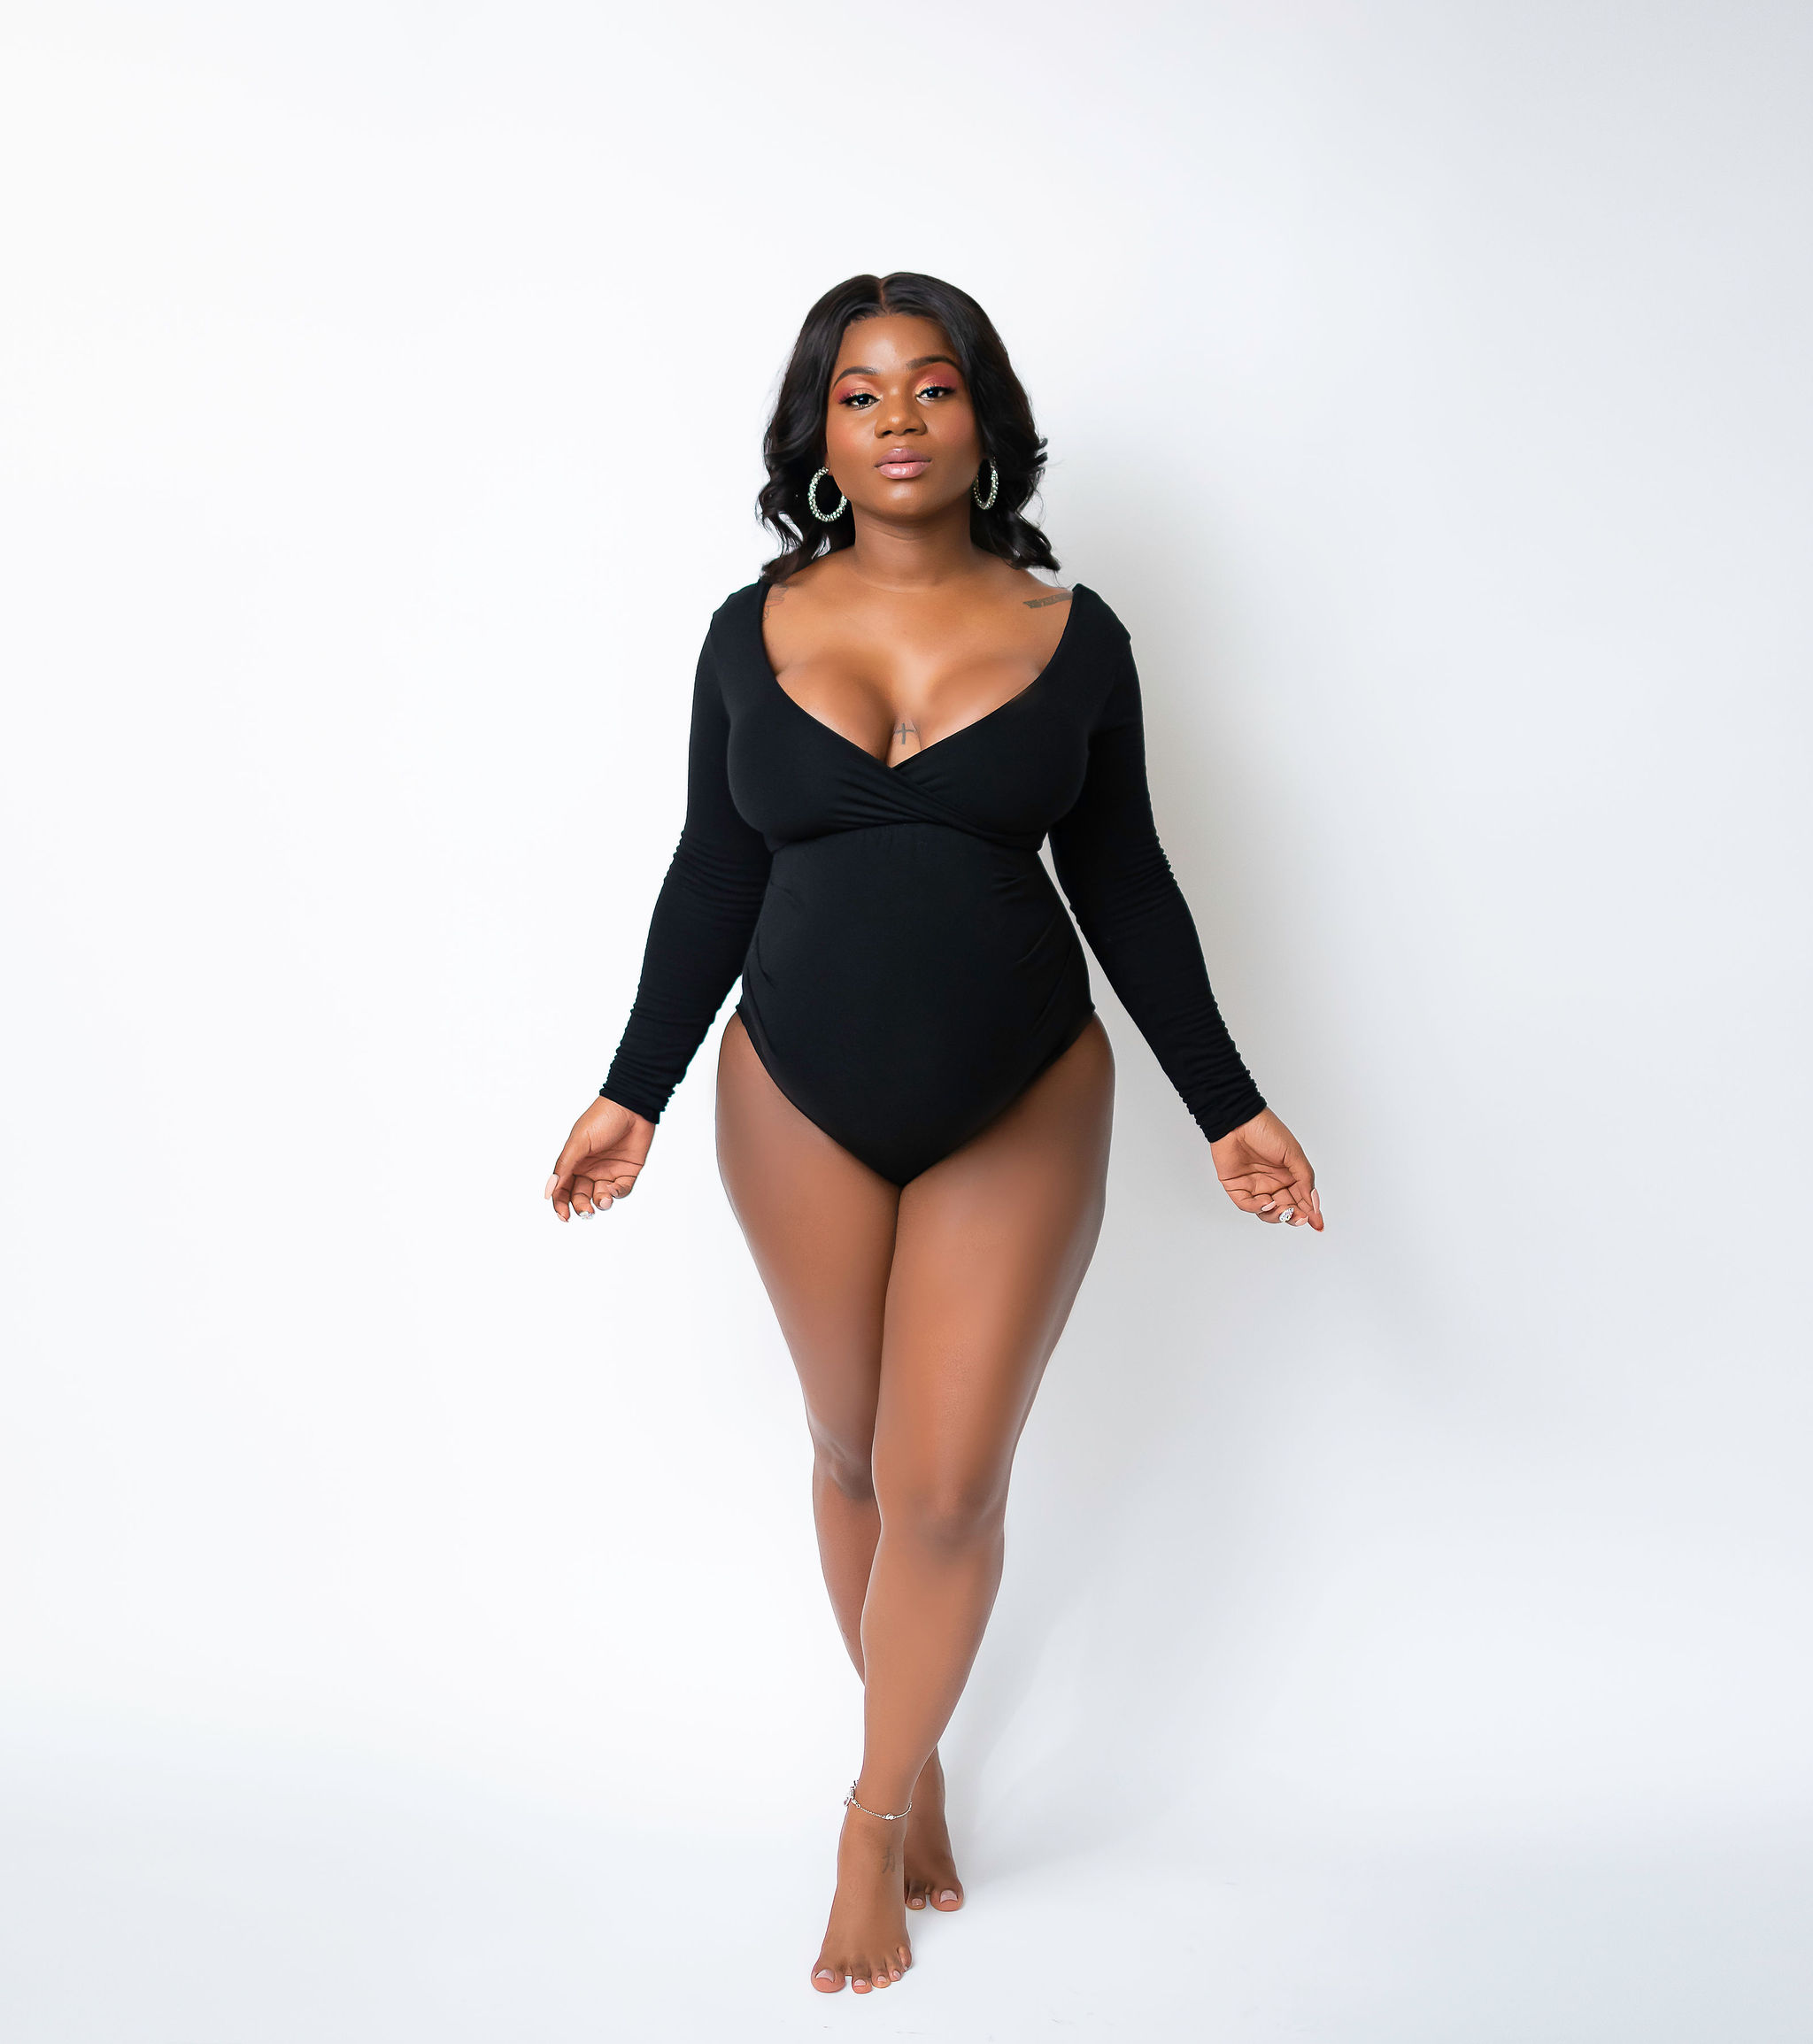 Black Diamand Maternity Bodysuit for Photoshoot, 2 Piece Maternity Bodysuit,  Pregnancy Bodysuit, Maternity Photography Props -  Canada